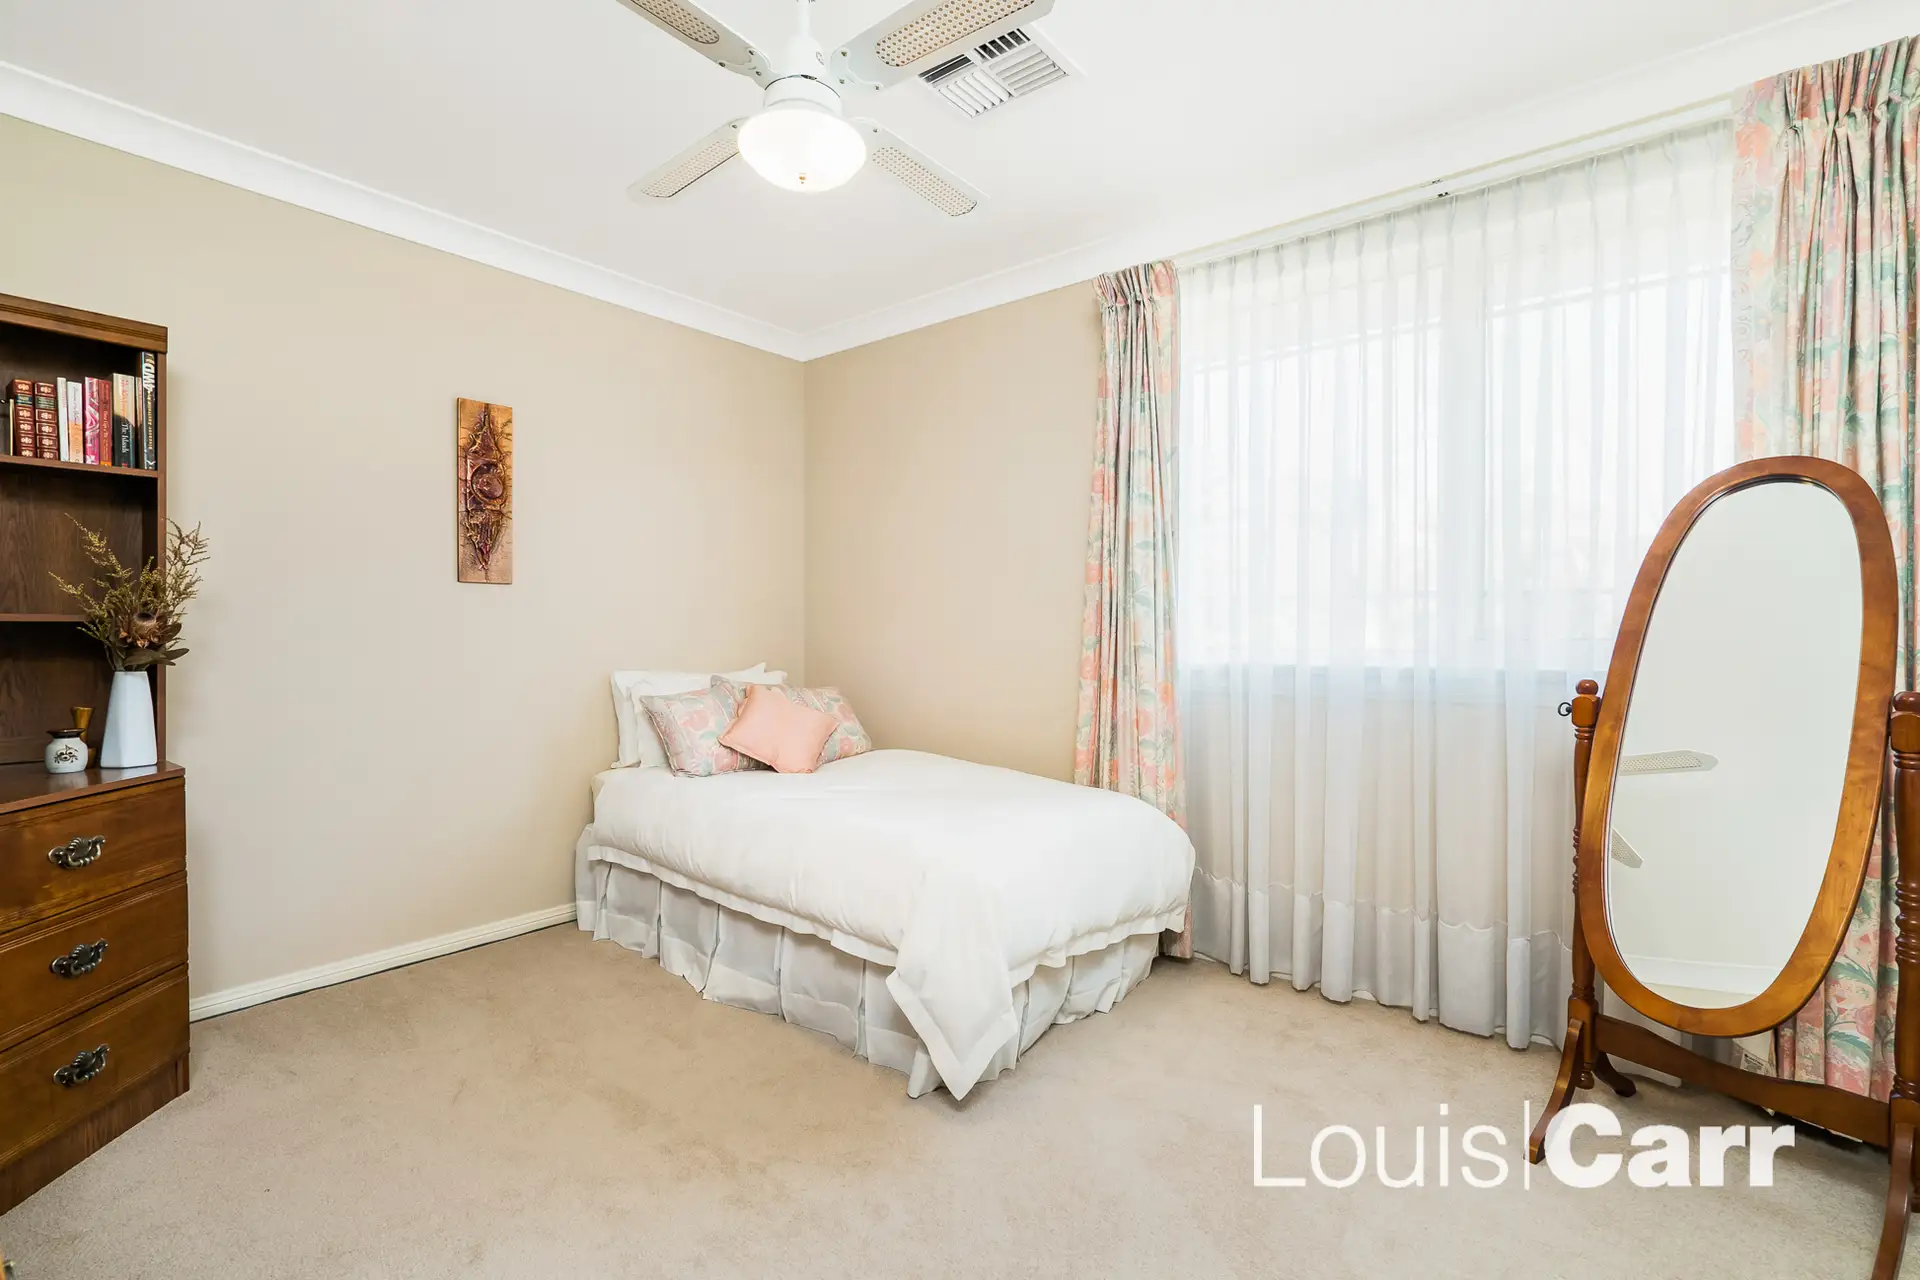 Photo #9: 1/51 Darlington Drive, Cherrybrook - Sold by Louis Carr Real Estate